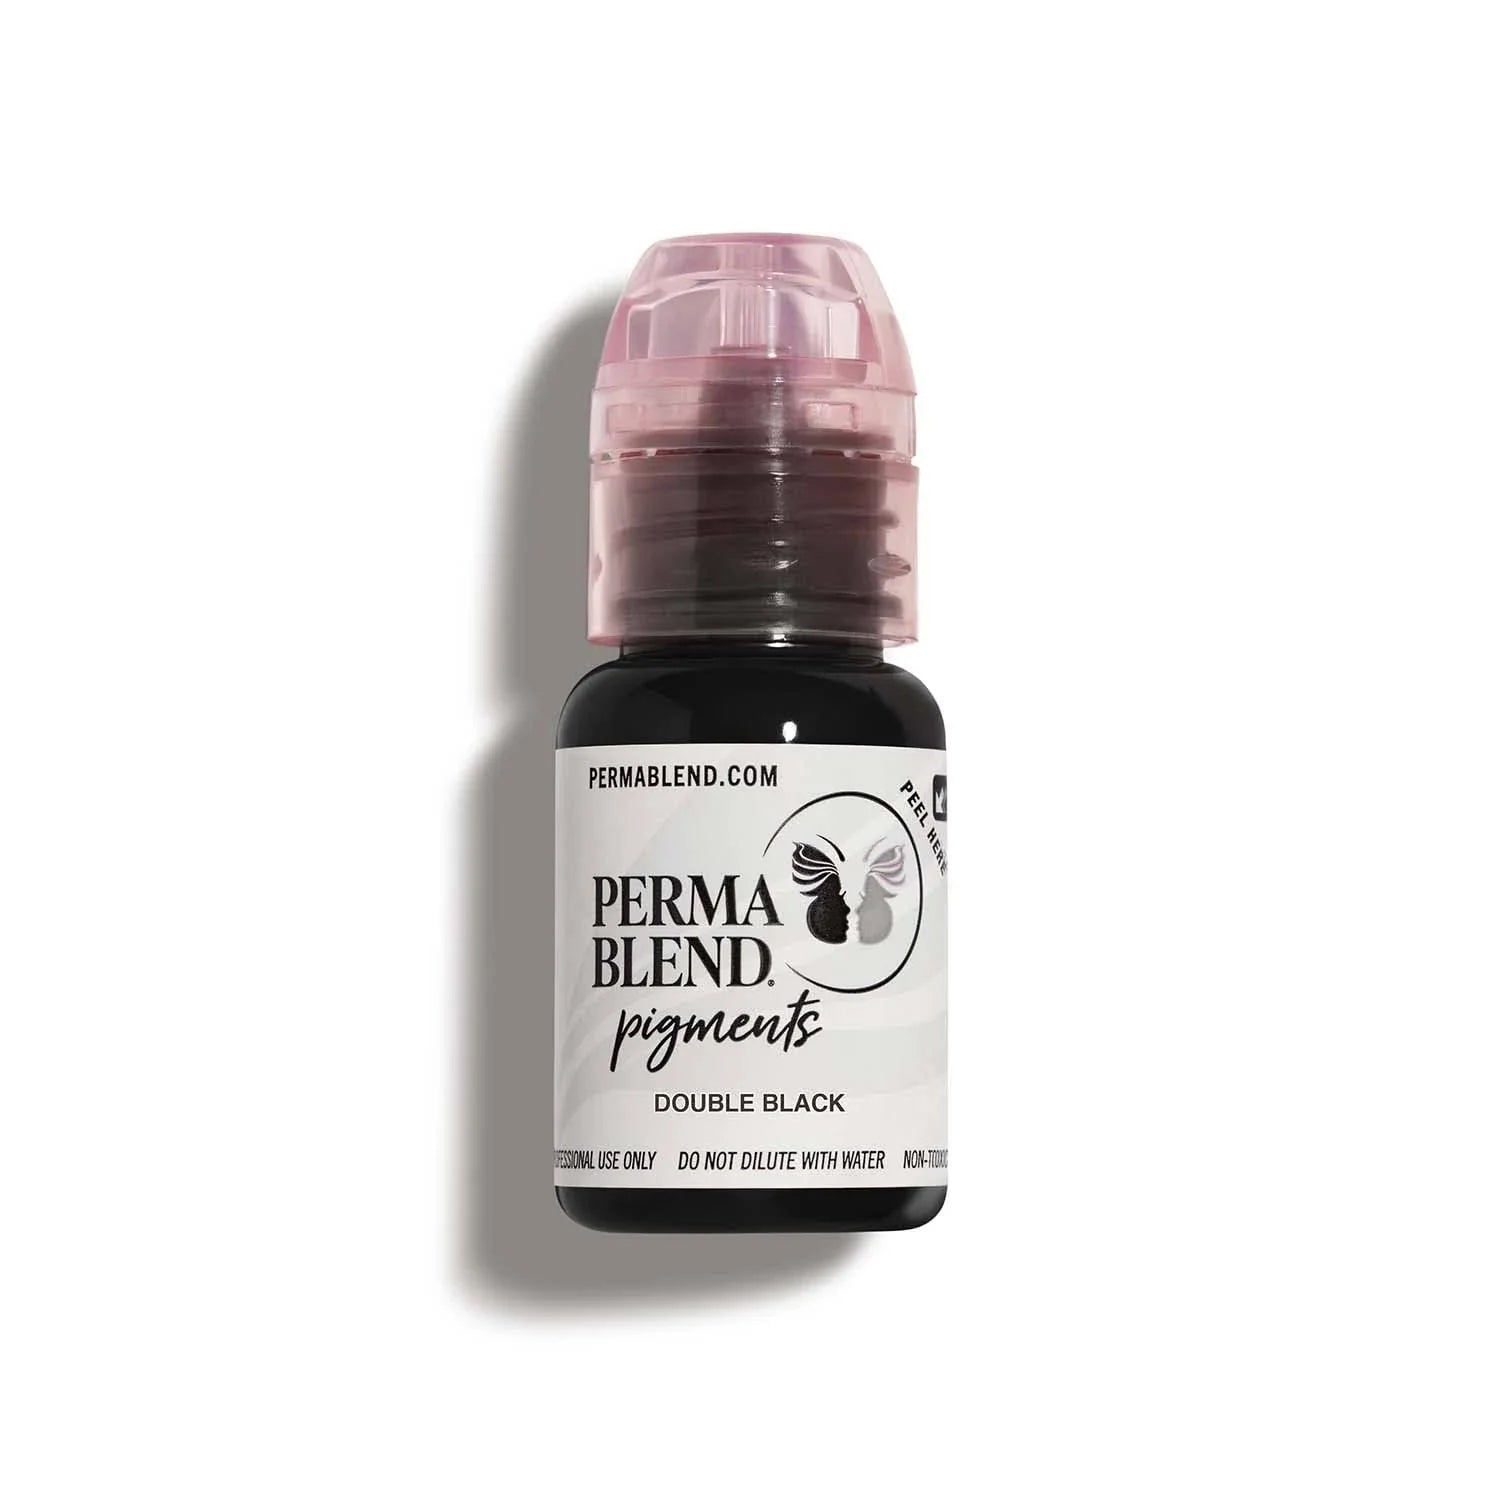 Double Black, eyeliner pigment for permament makeup by Perma Blend